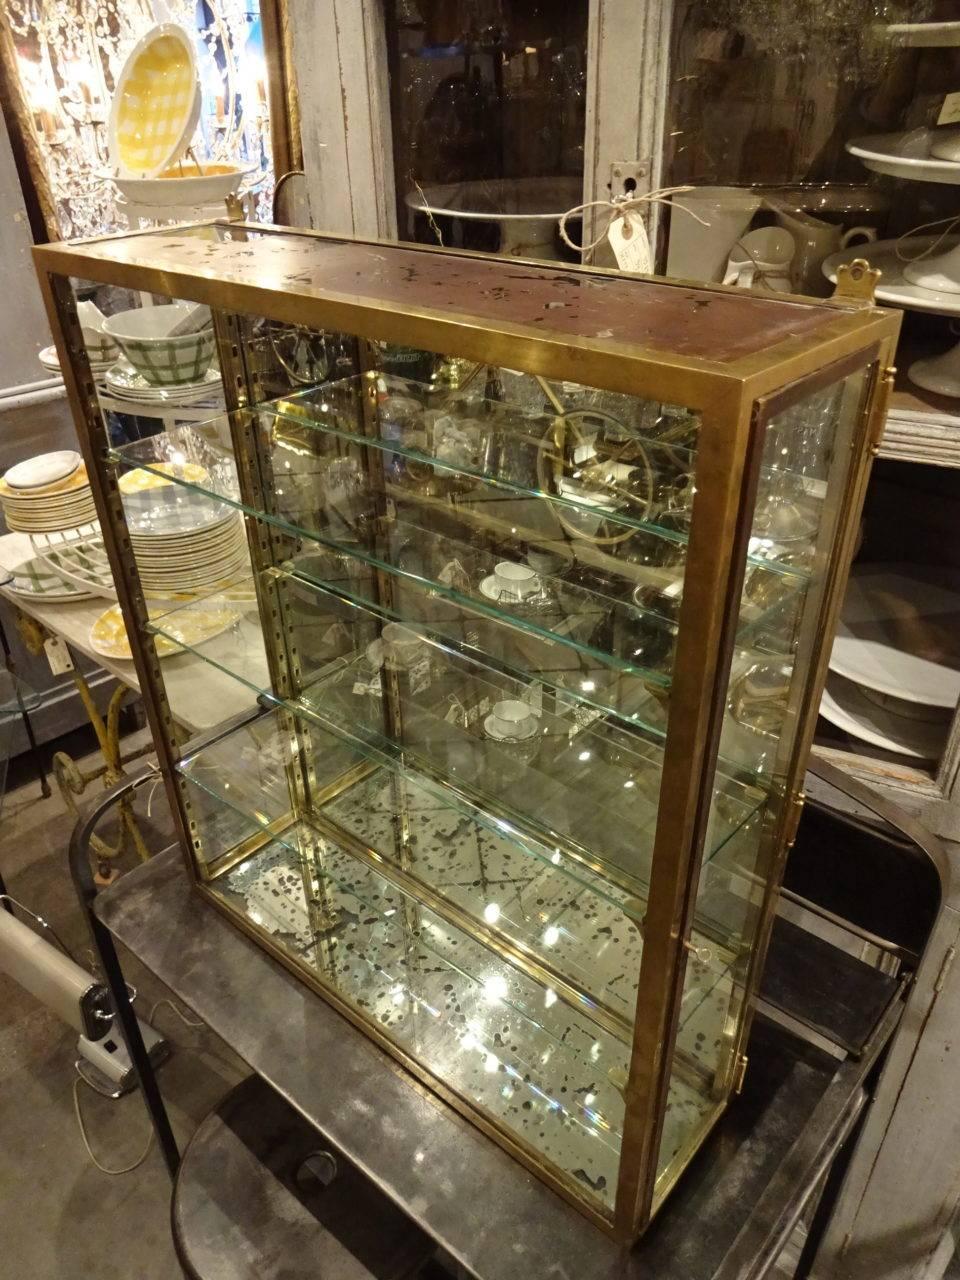 Beautifully patinated old French display cabinet in brass with glass doors at each end. The cabinet has the original mounted wall brackets and three glass shelves. The doors can be shut but not locked.

Measures: H 80 x W 70 x D 20.5 cm.